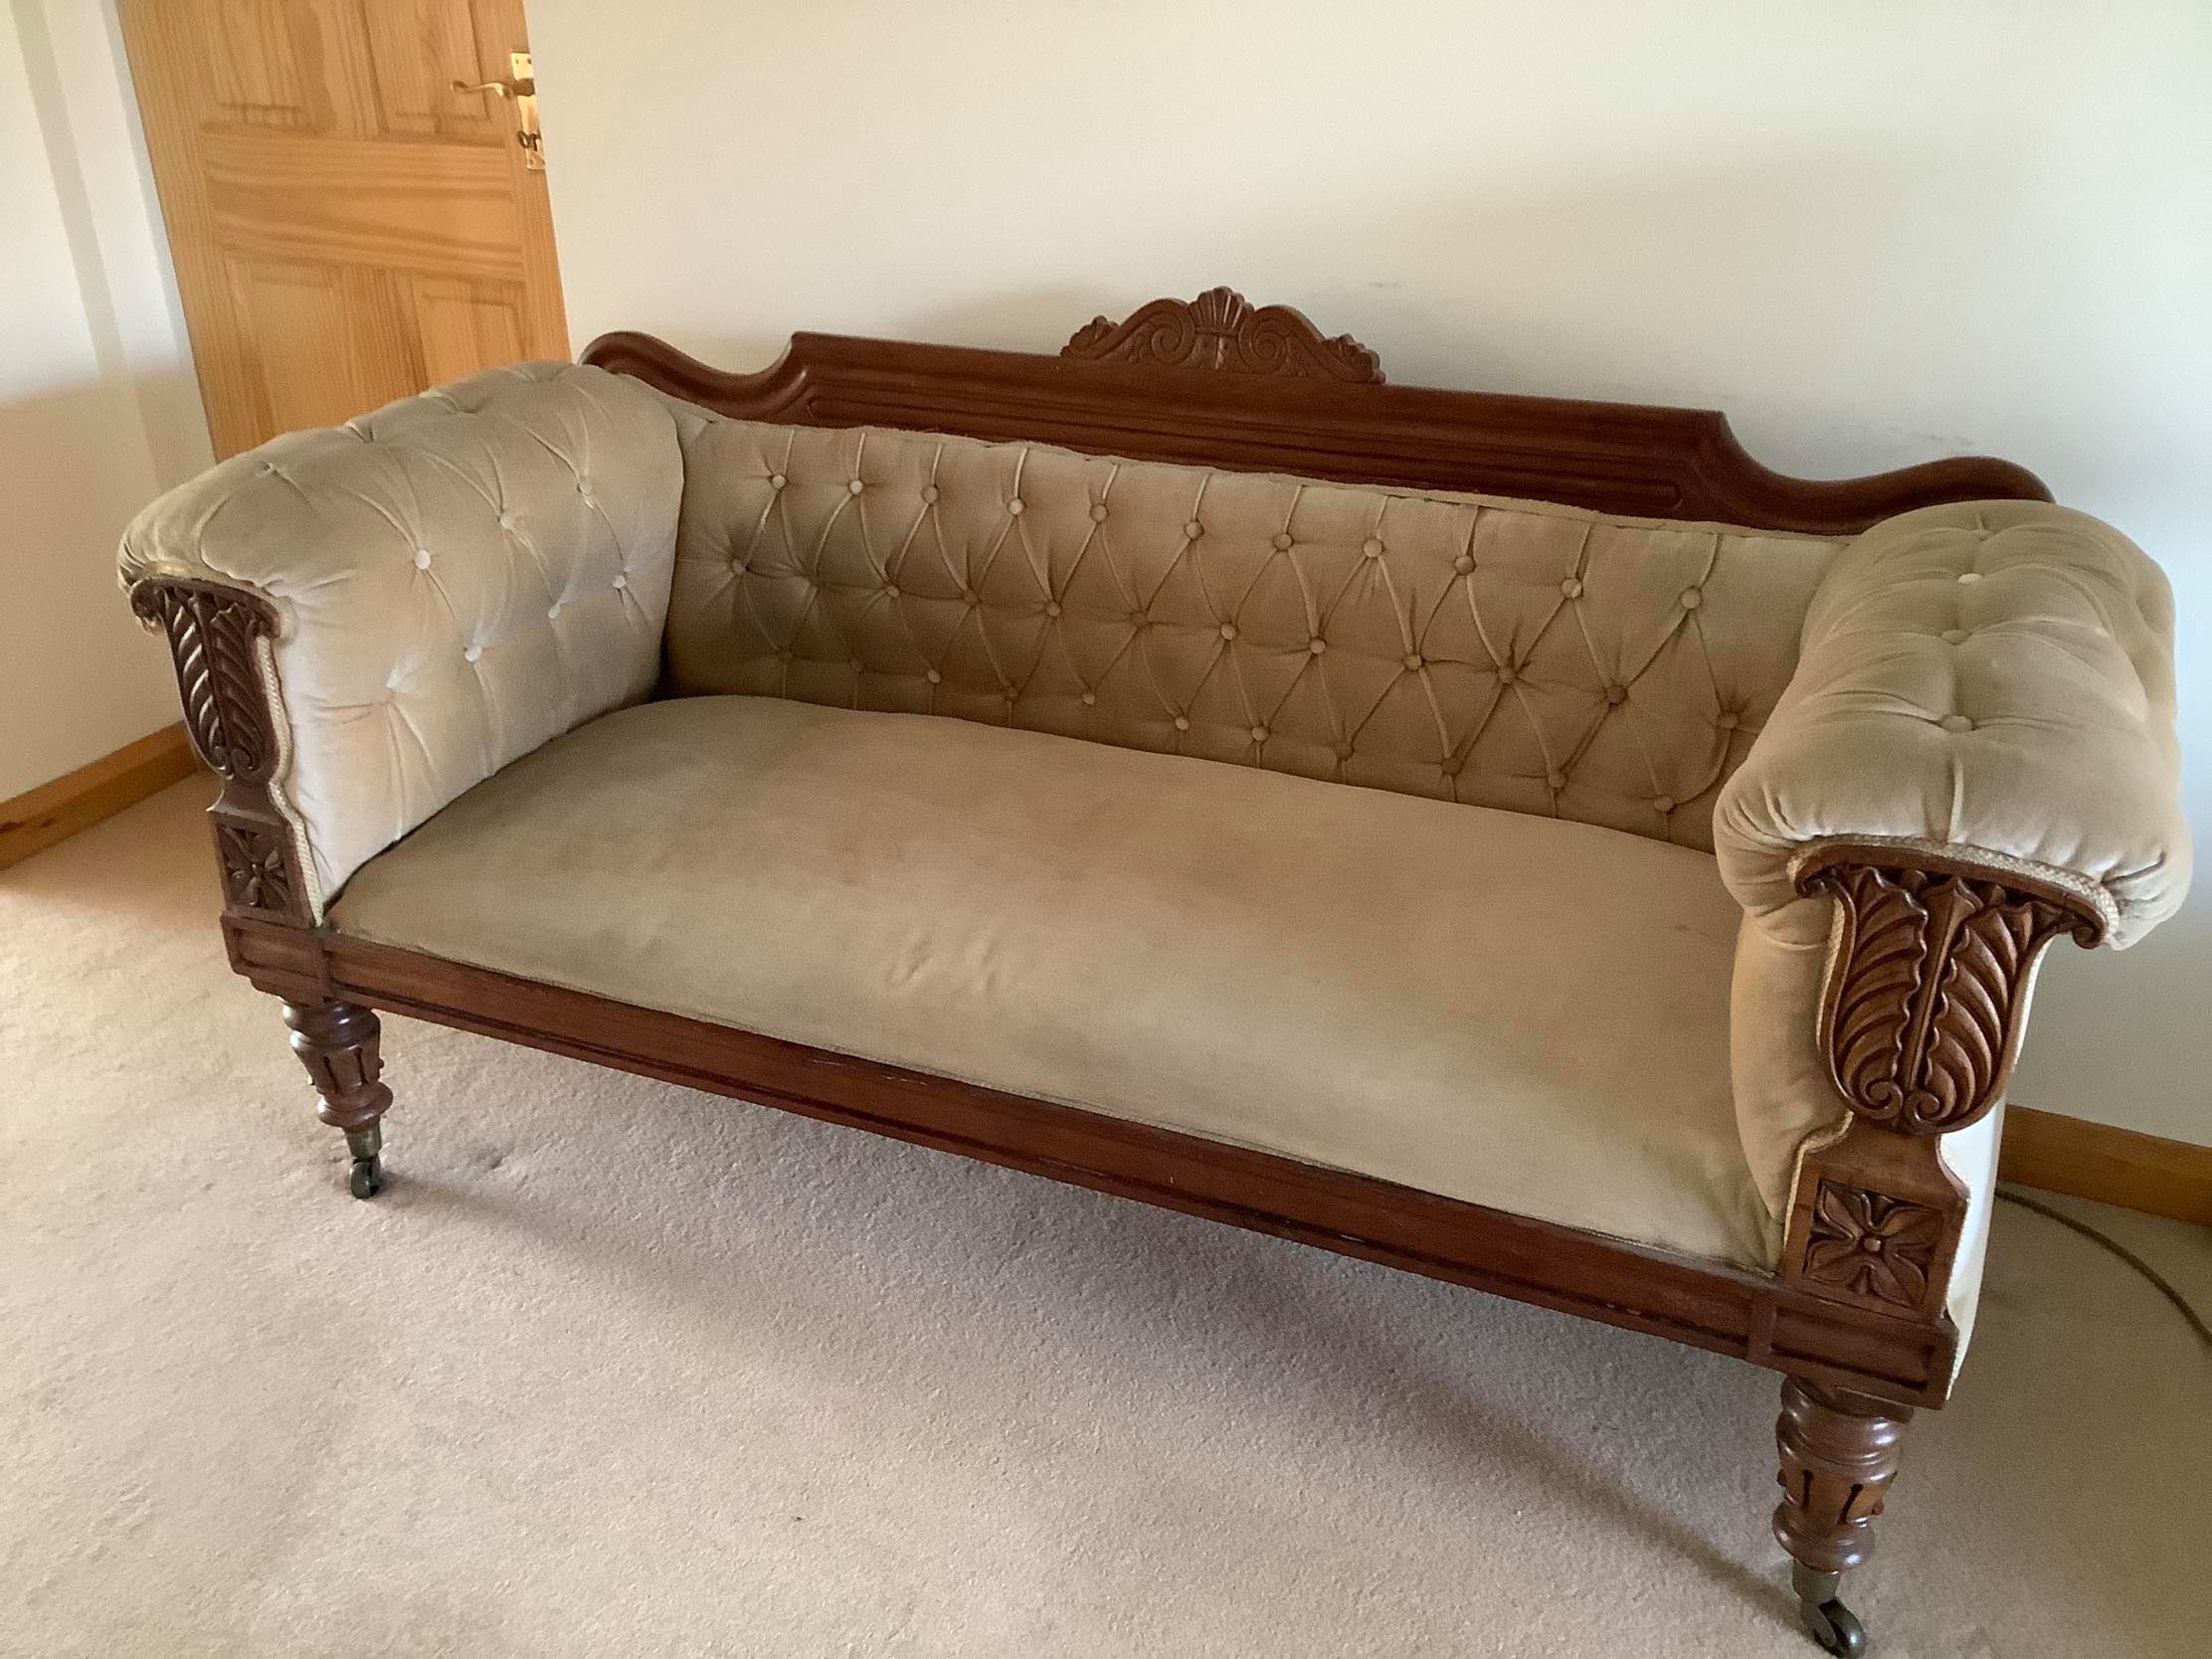 antique bed used as a sofa